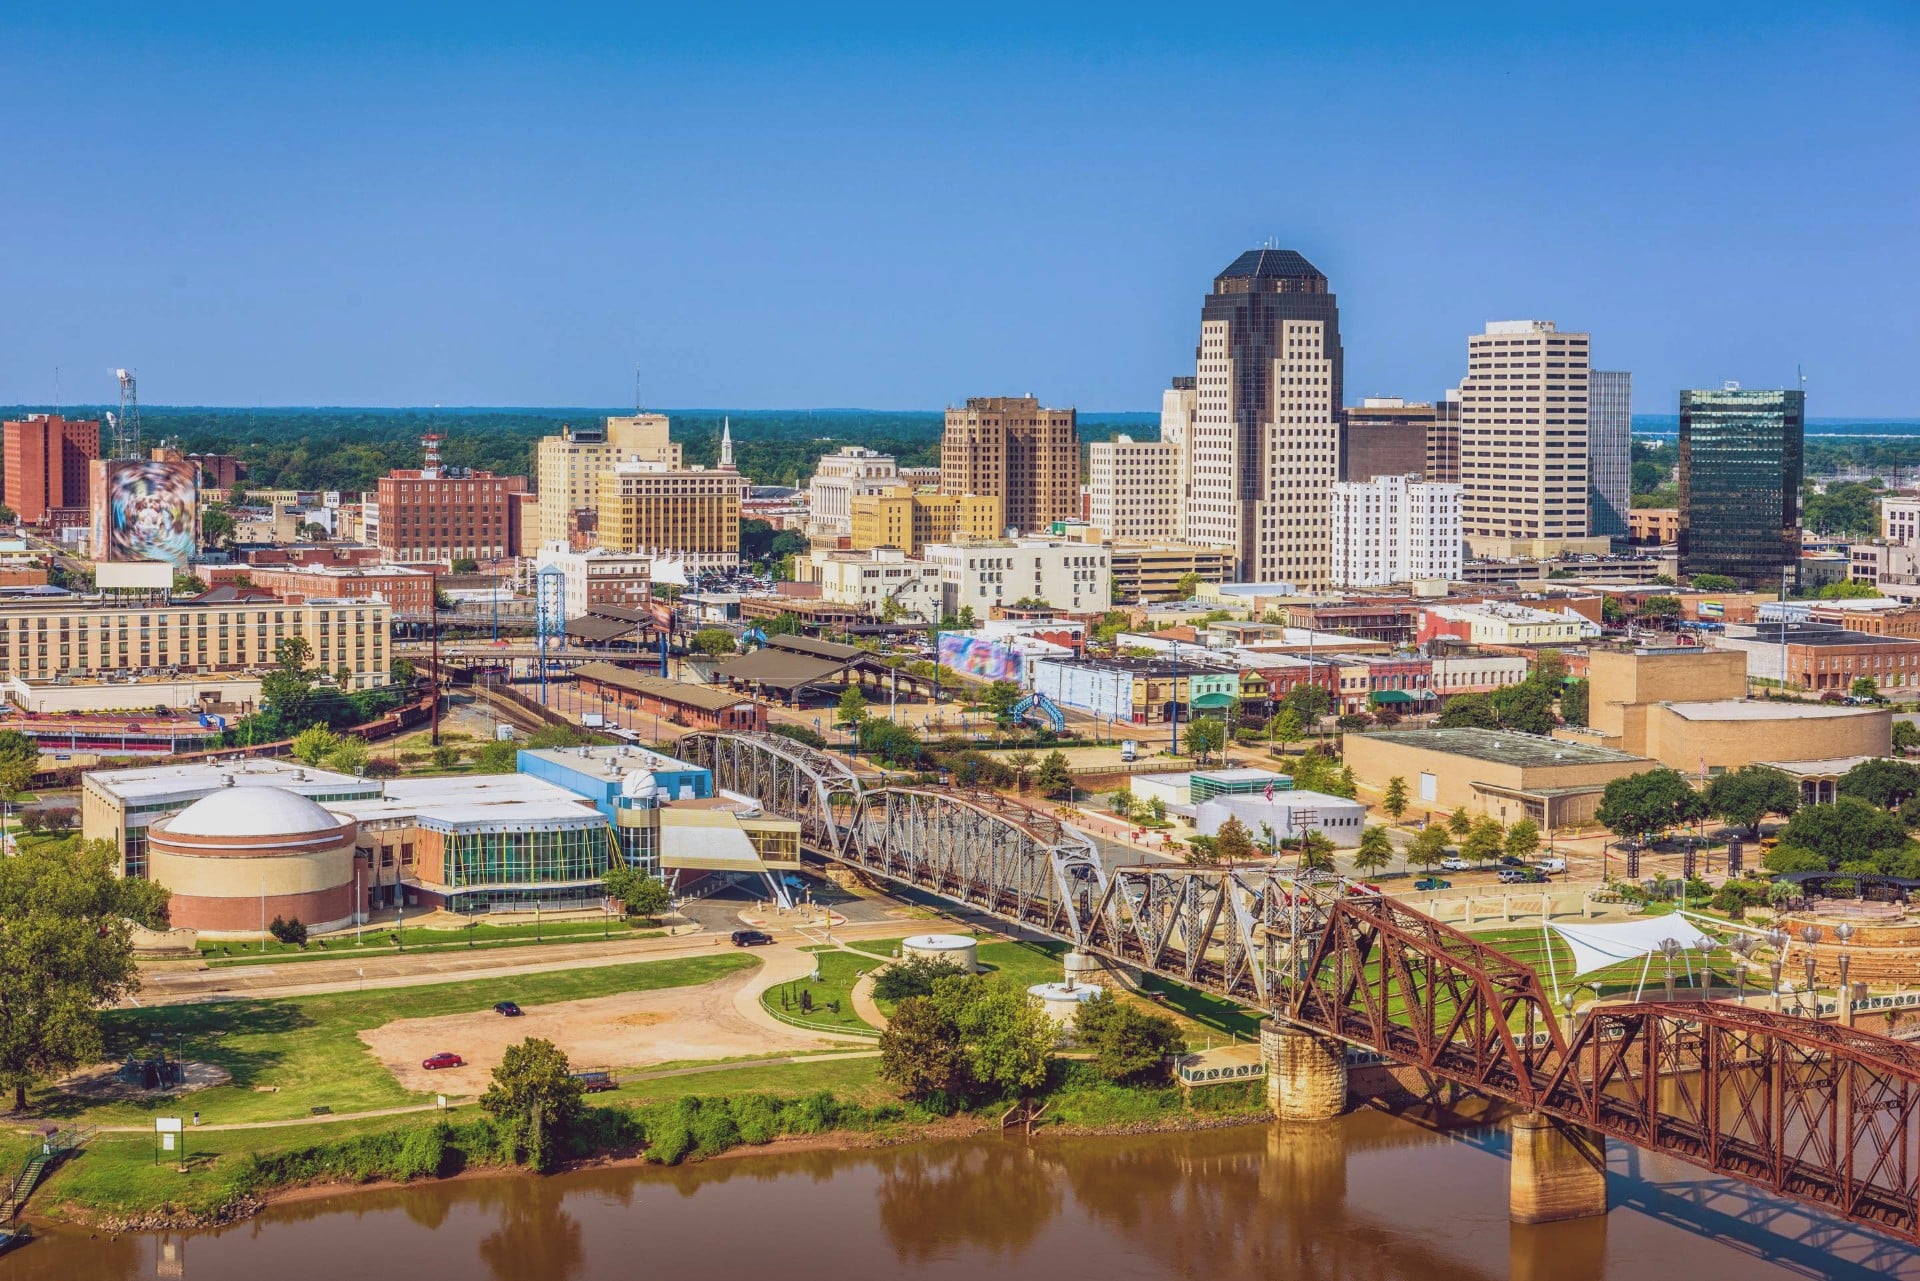 The Best Areas to Stay in Shreveport, LA